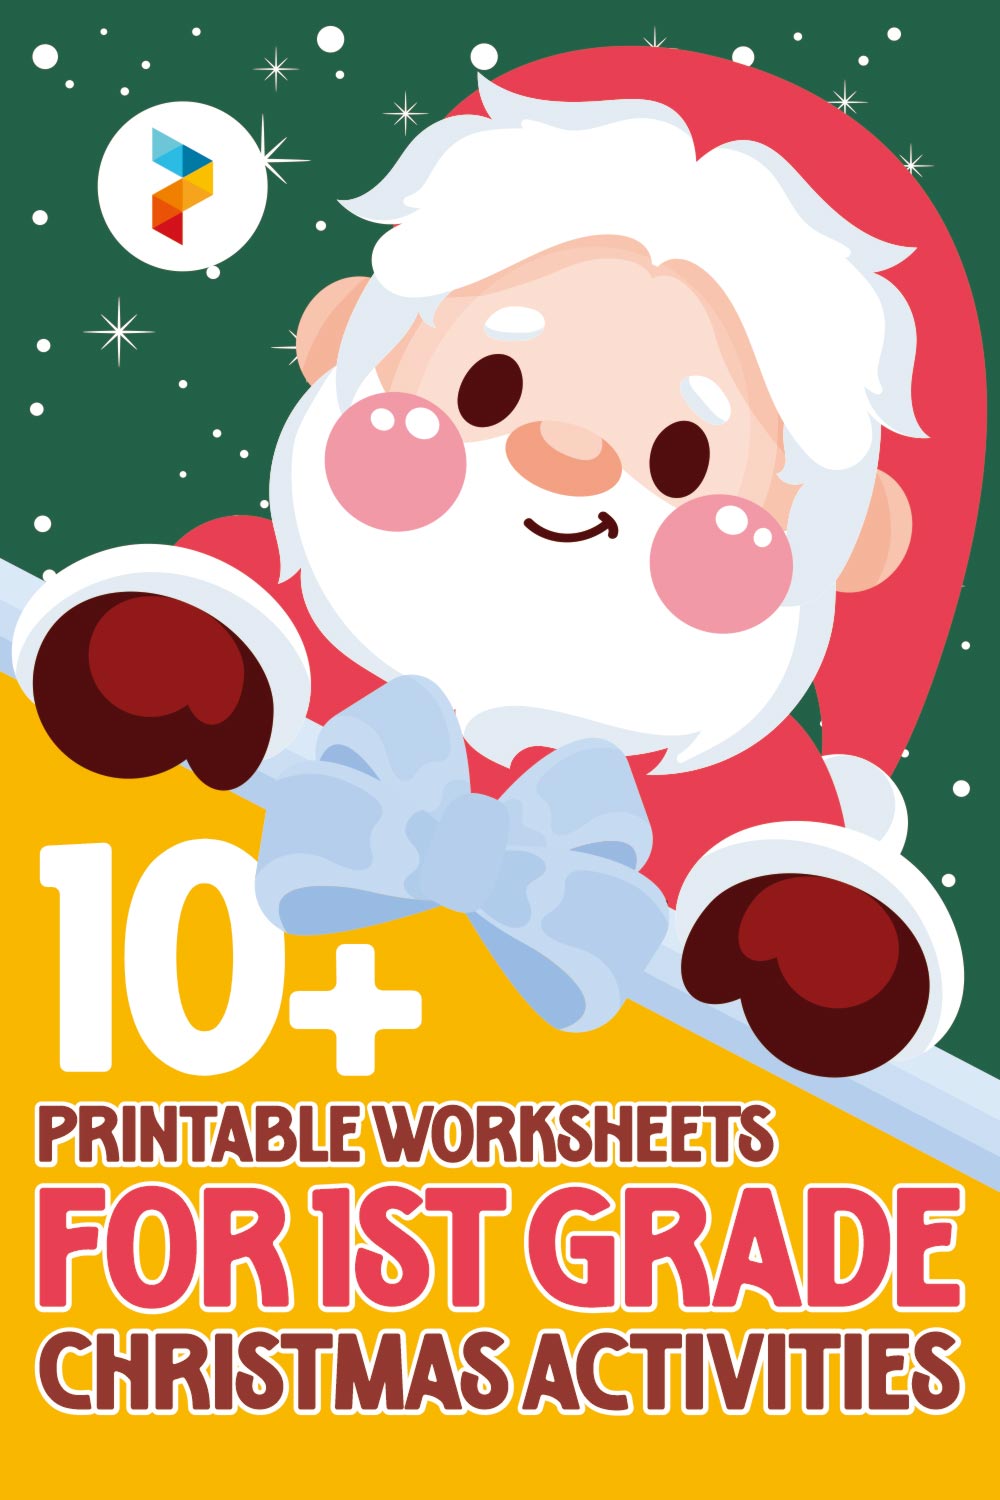 Printable Worksheets For 1st Grade Christmas Activities